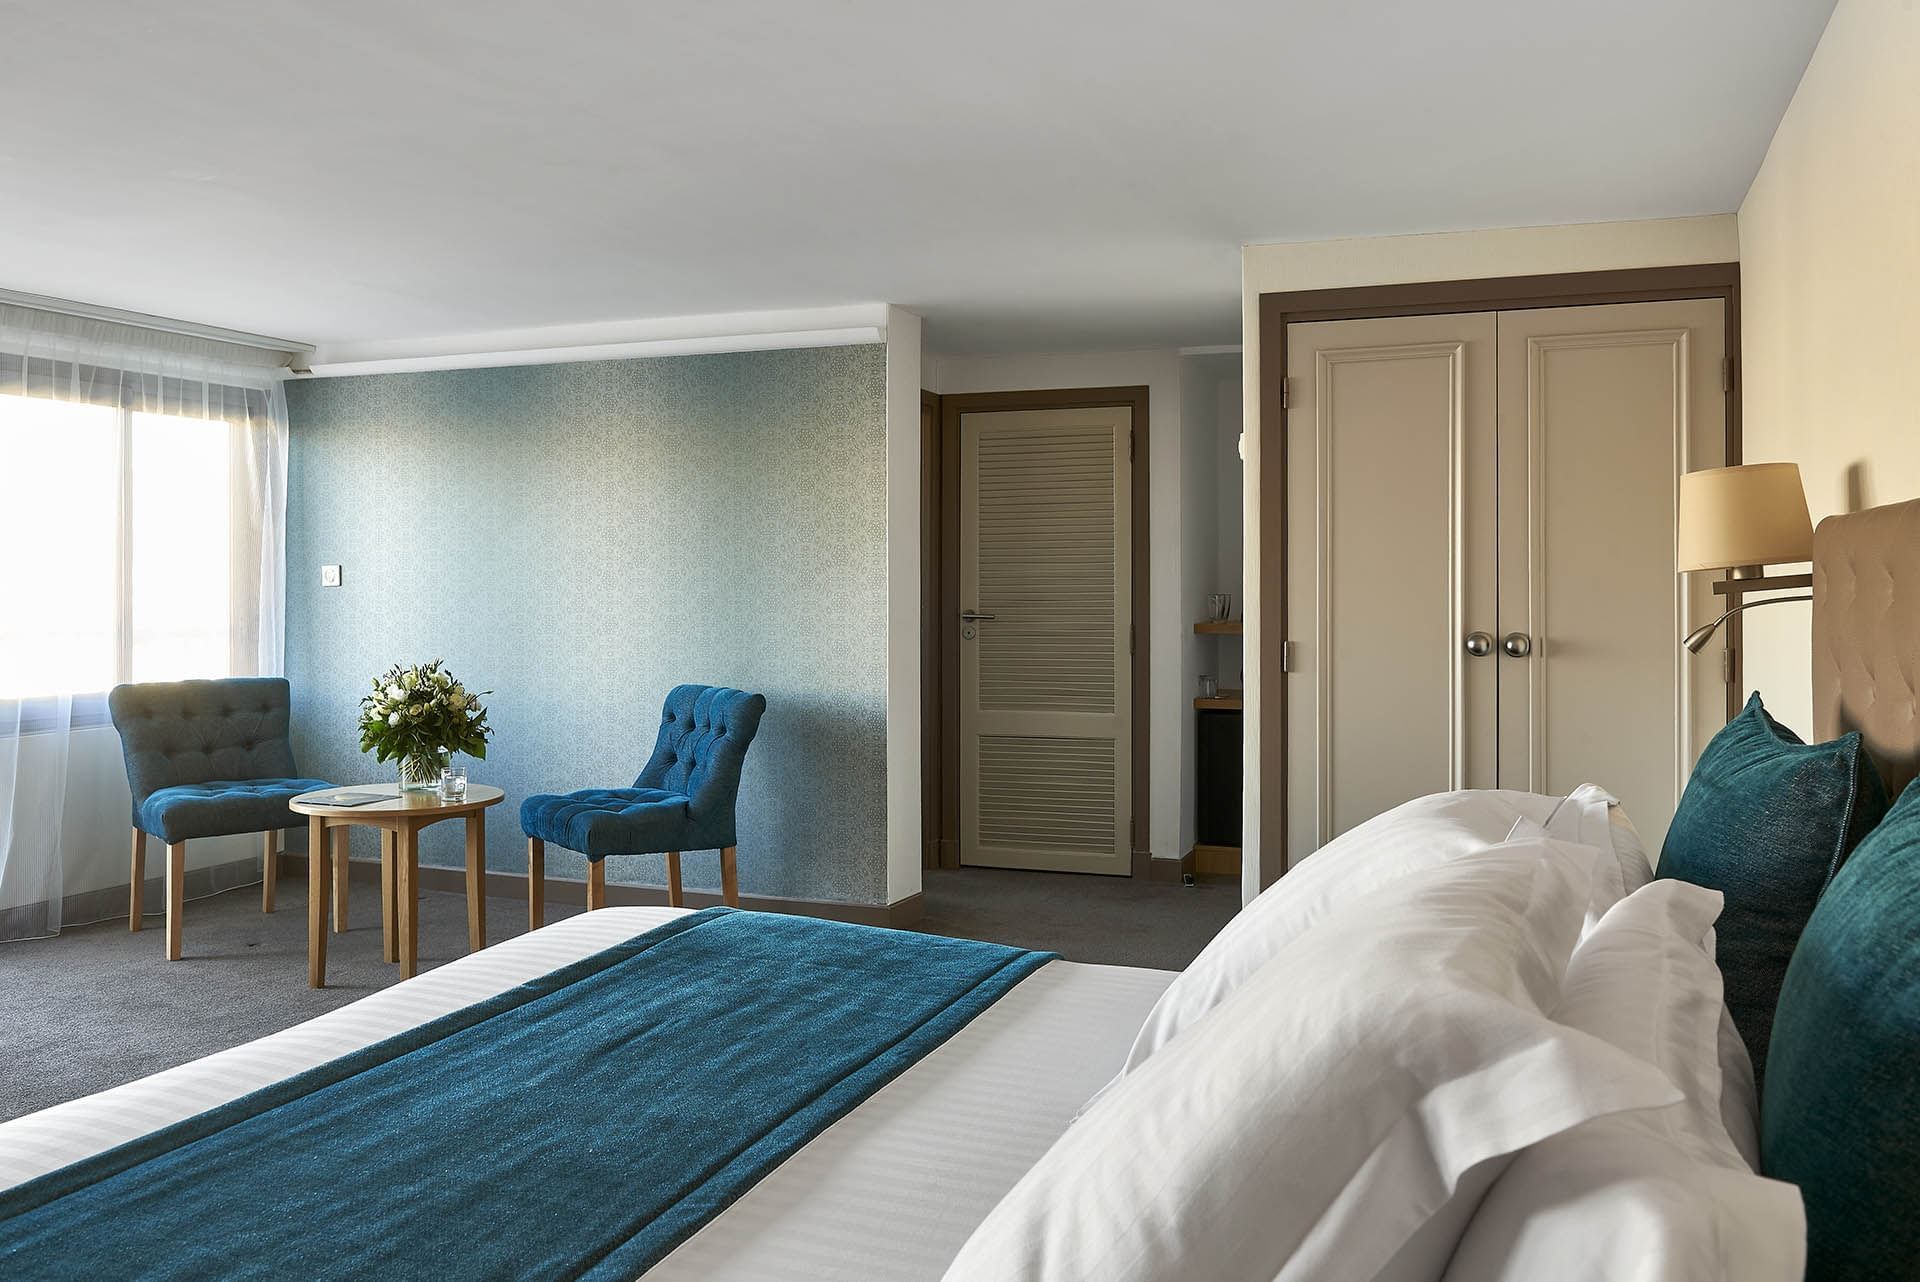 Splendid Hotel and Spa Deluxe Room